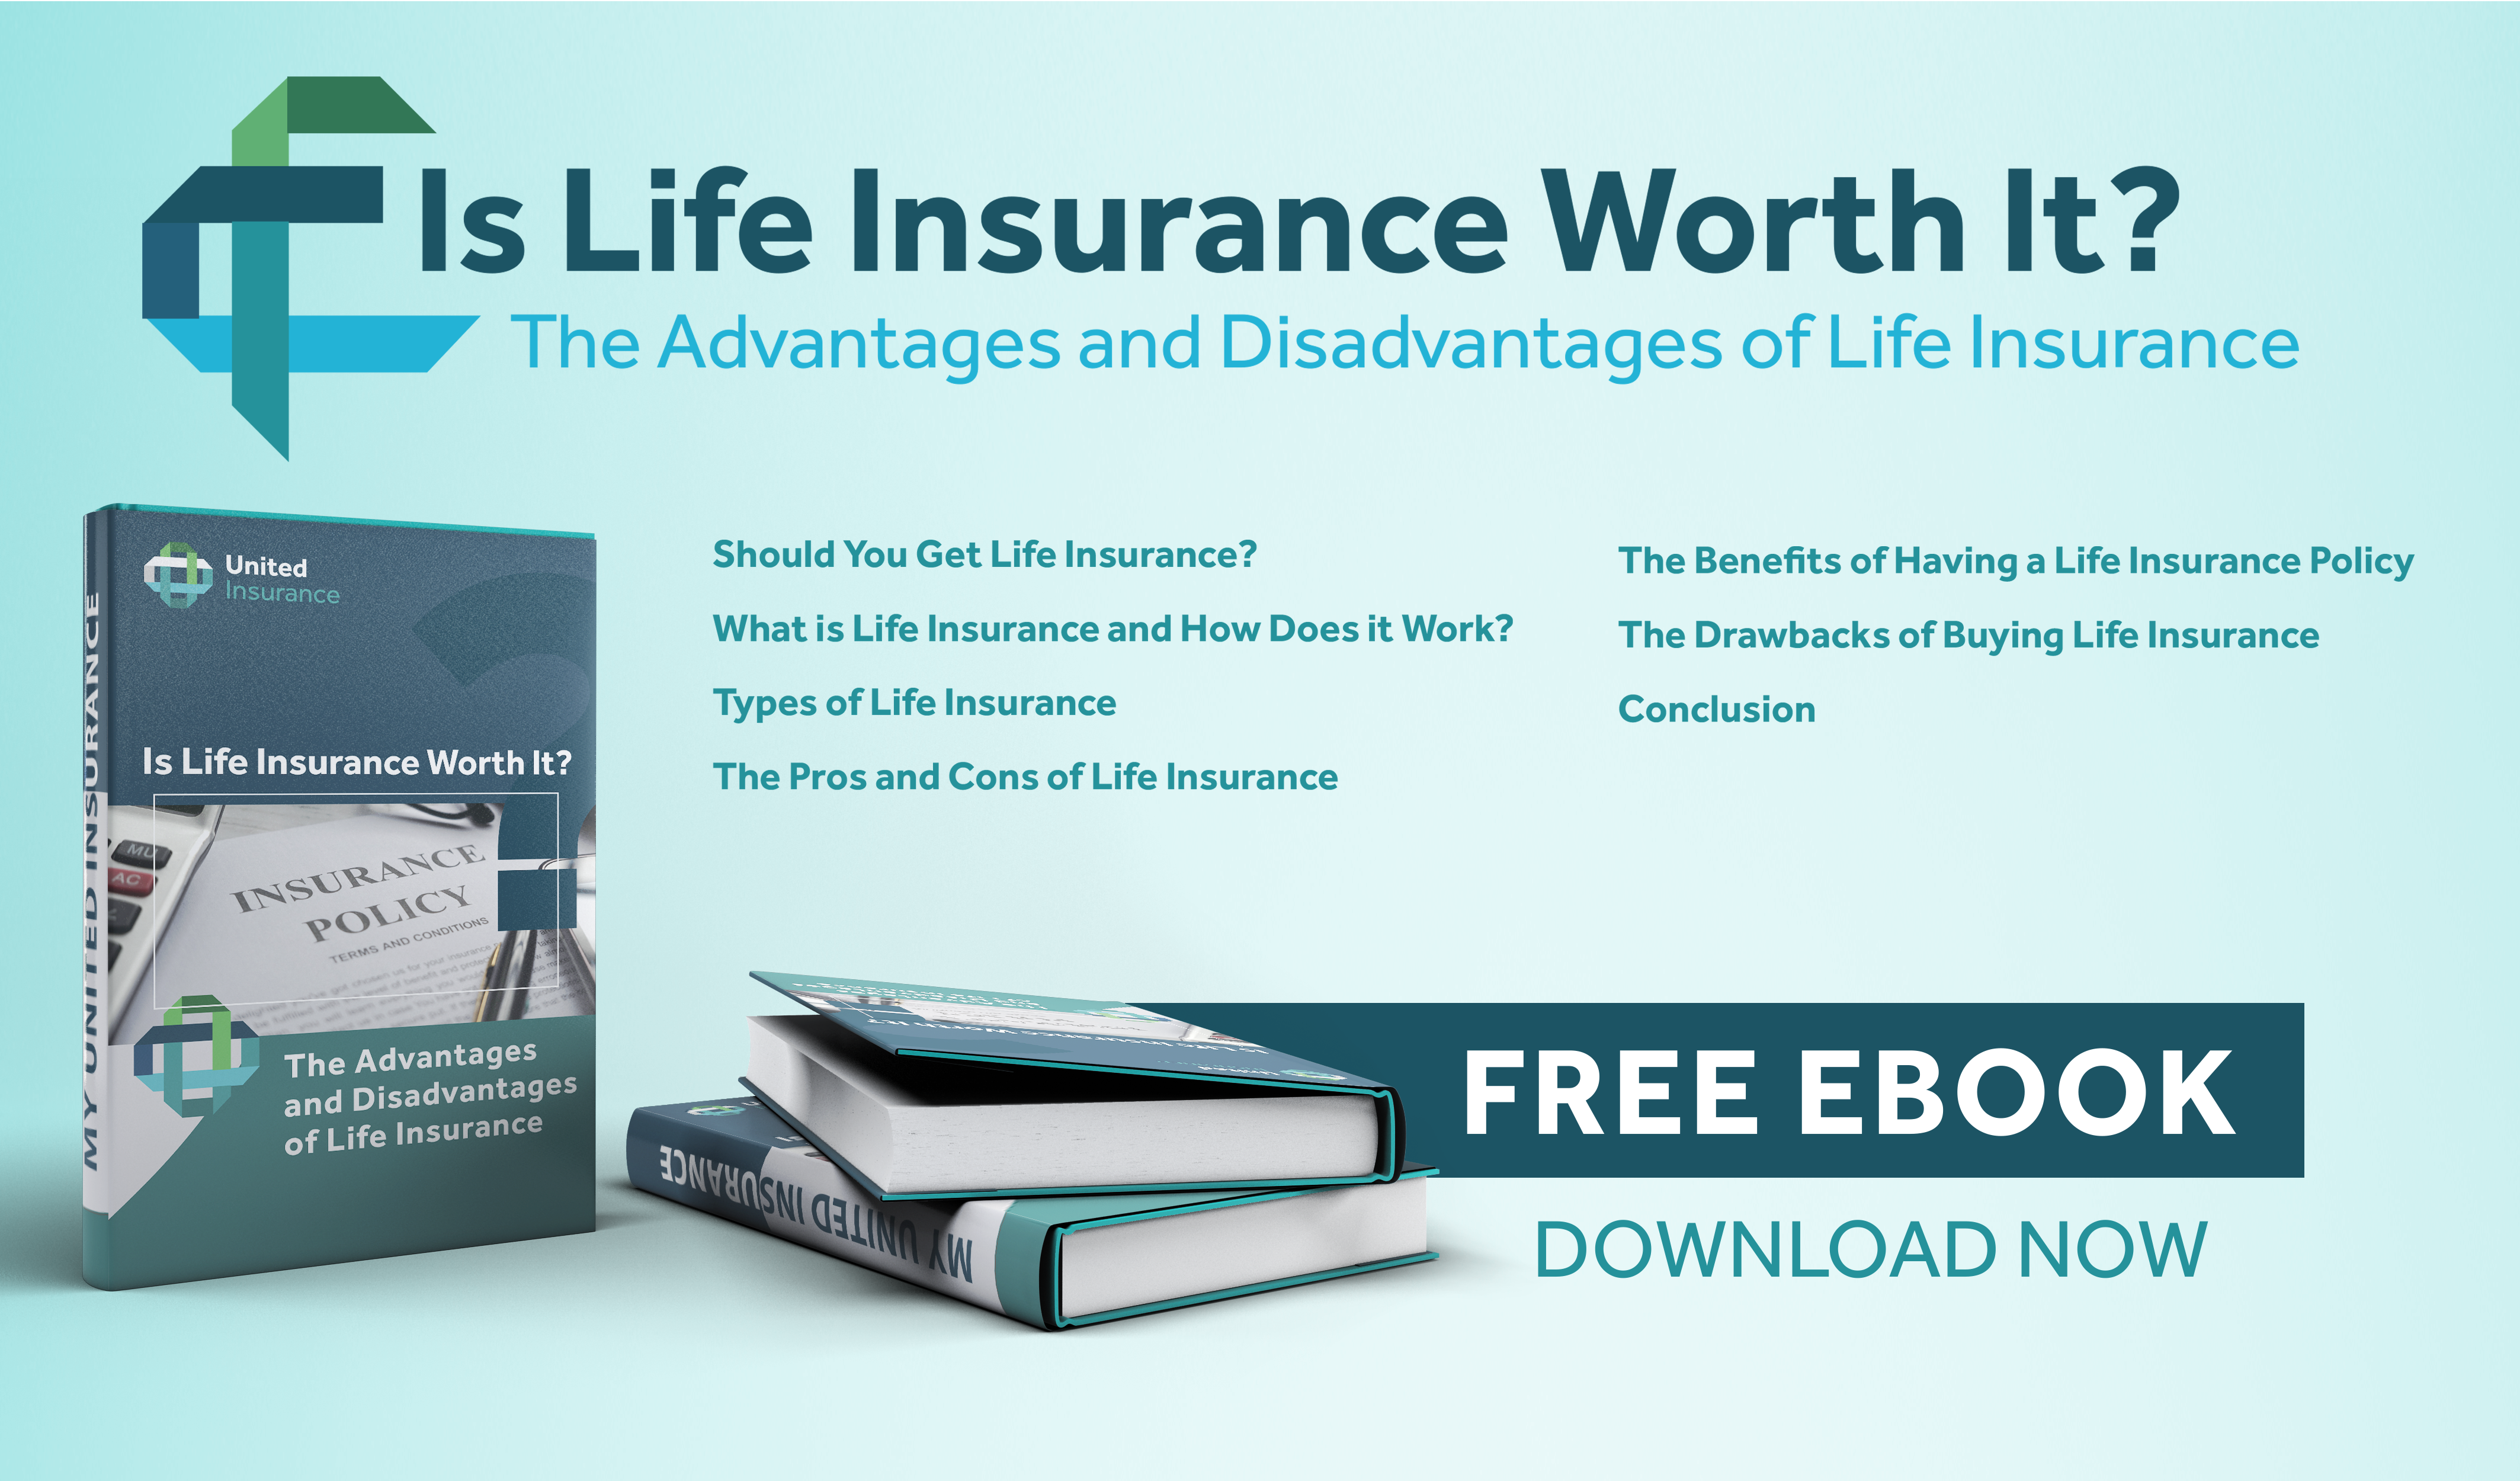 eBook: The pros and cons of life insurance!